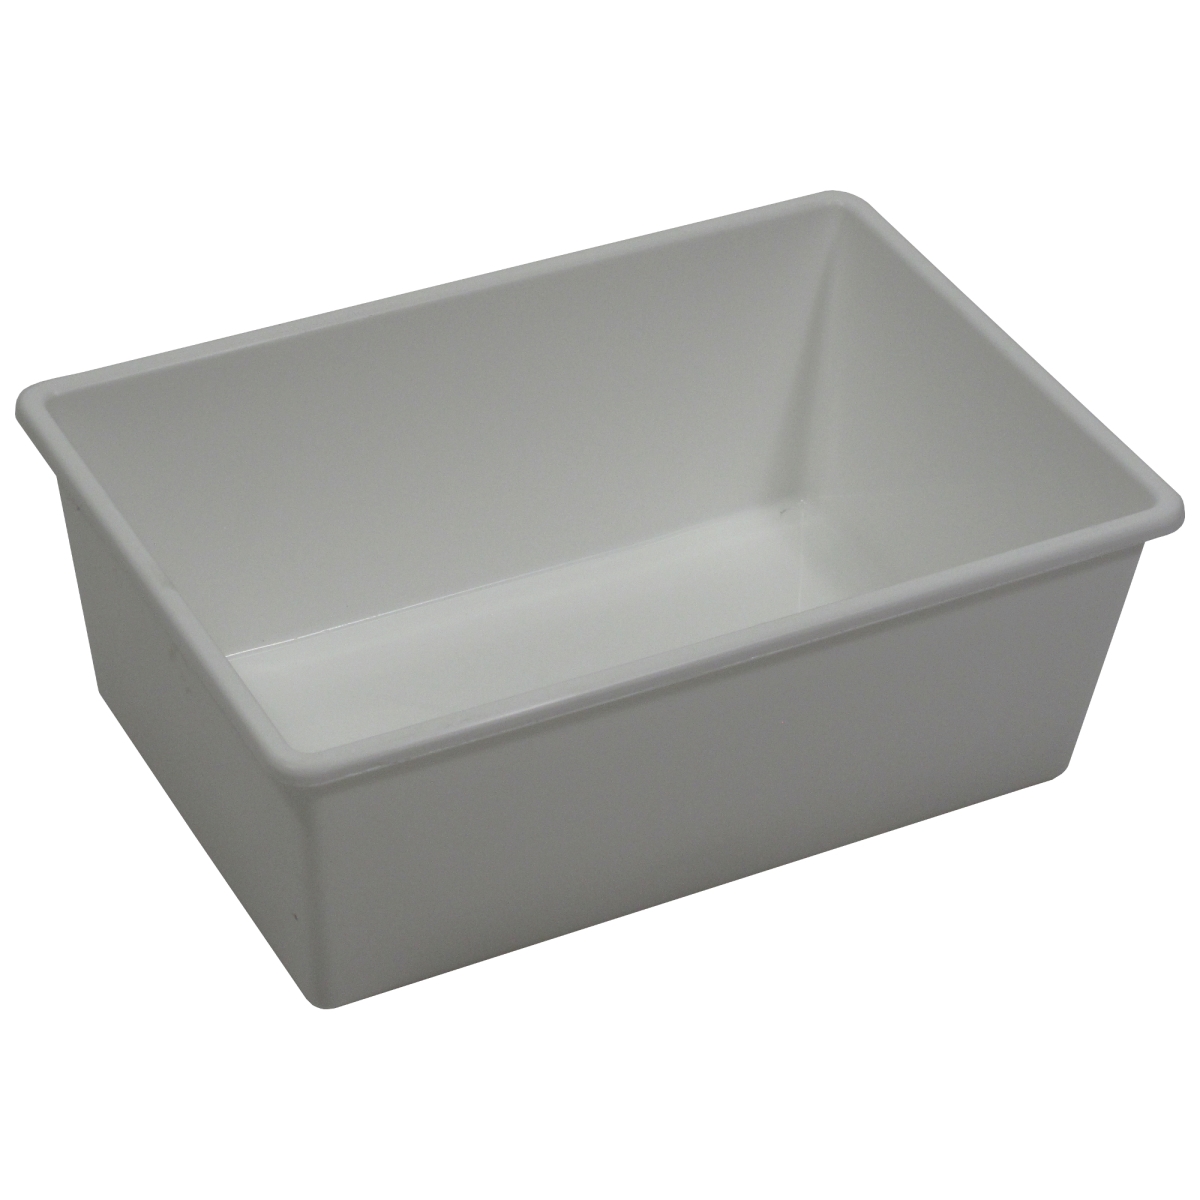 7427wh 12 Litre & 3.2 Gal Heavy Duty Tray, White